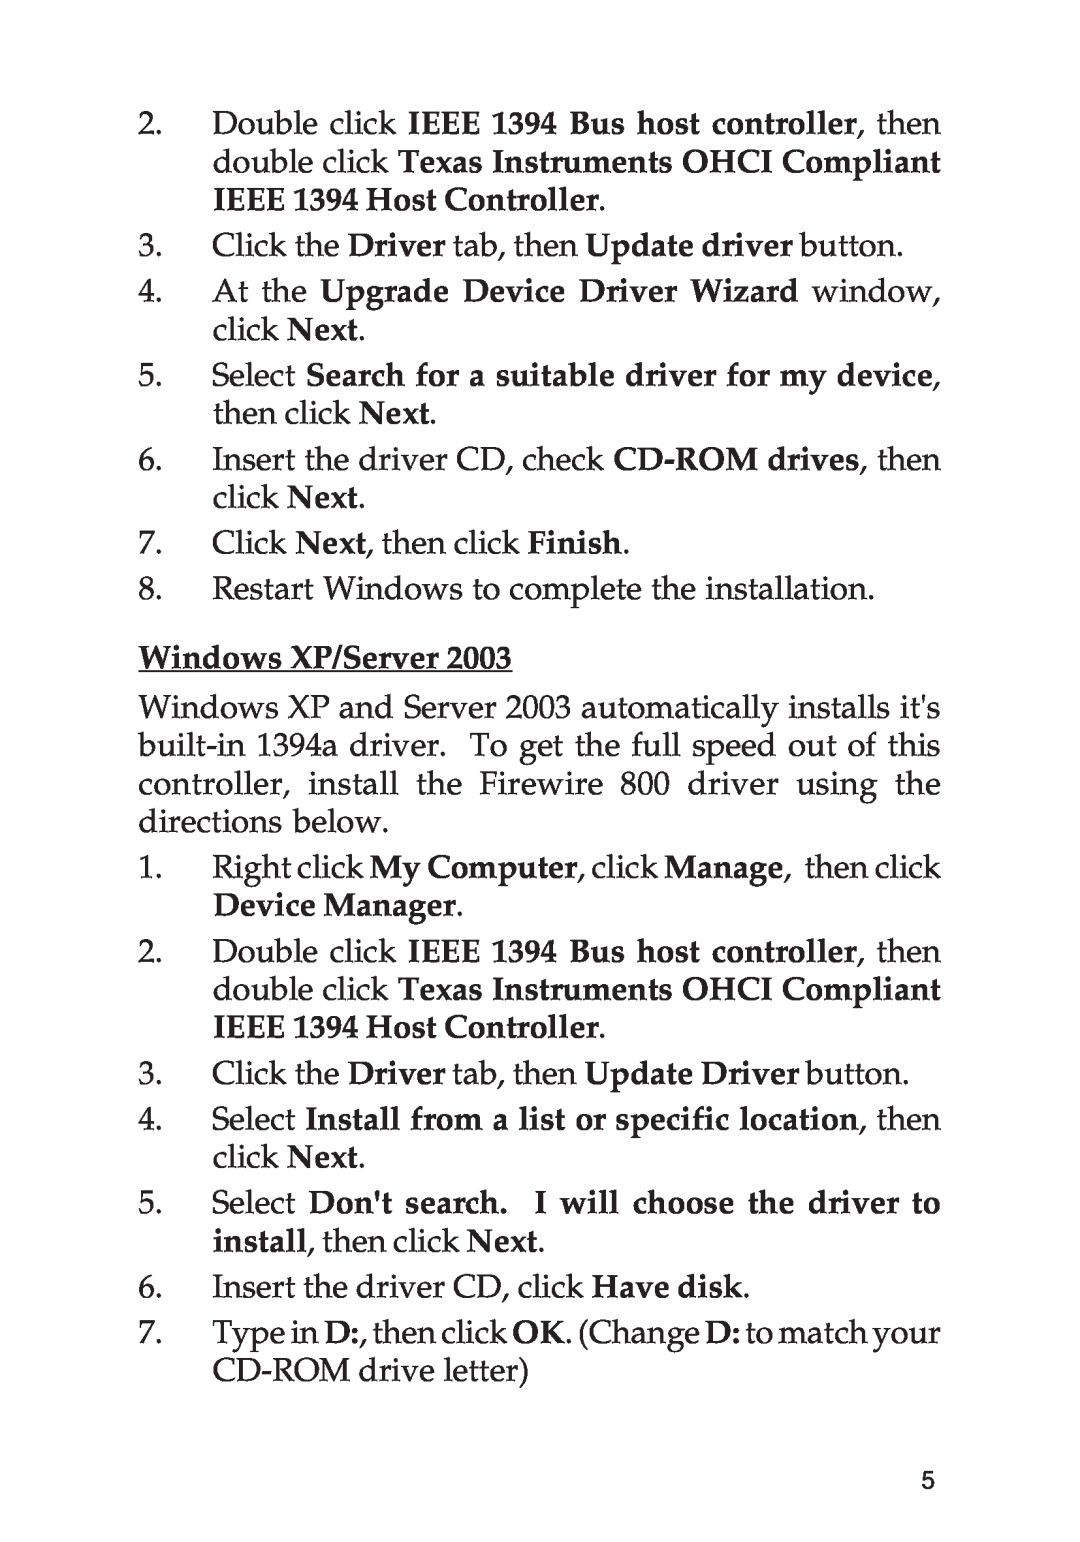 SIIG 700 manual At the Upgrade Device Driver Wizard window, click Next, Windows XP/Server 